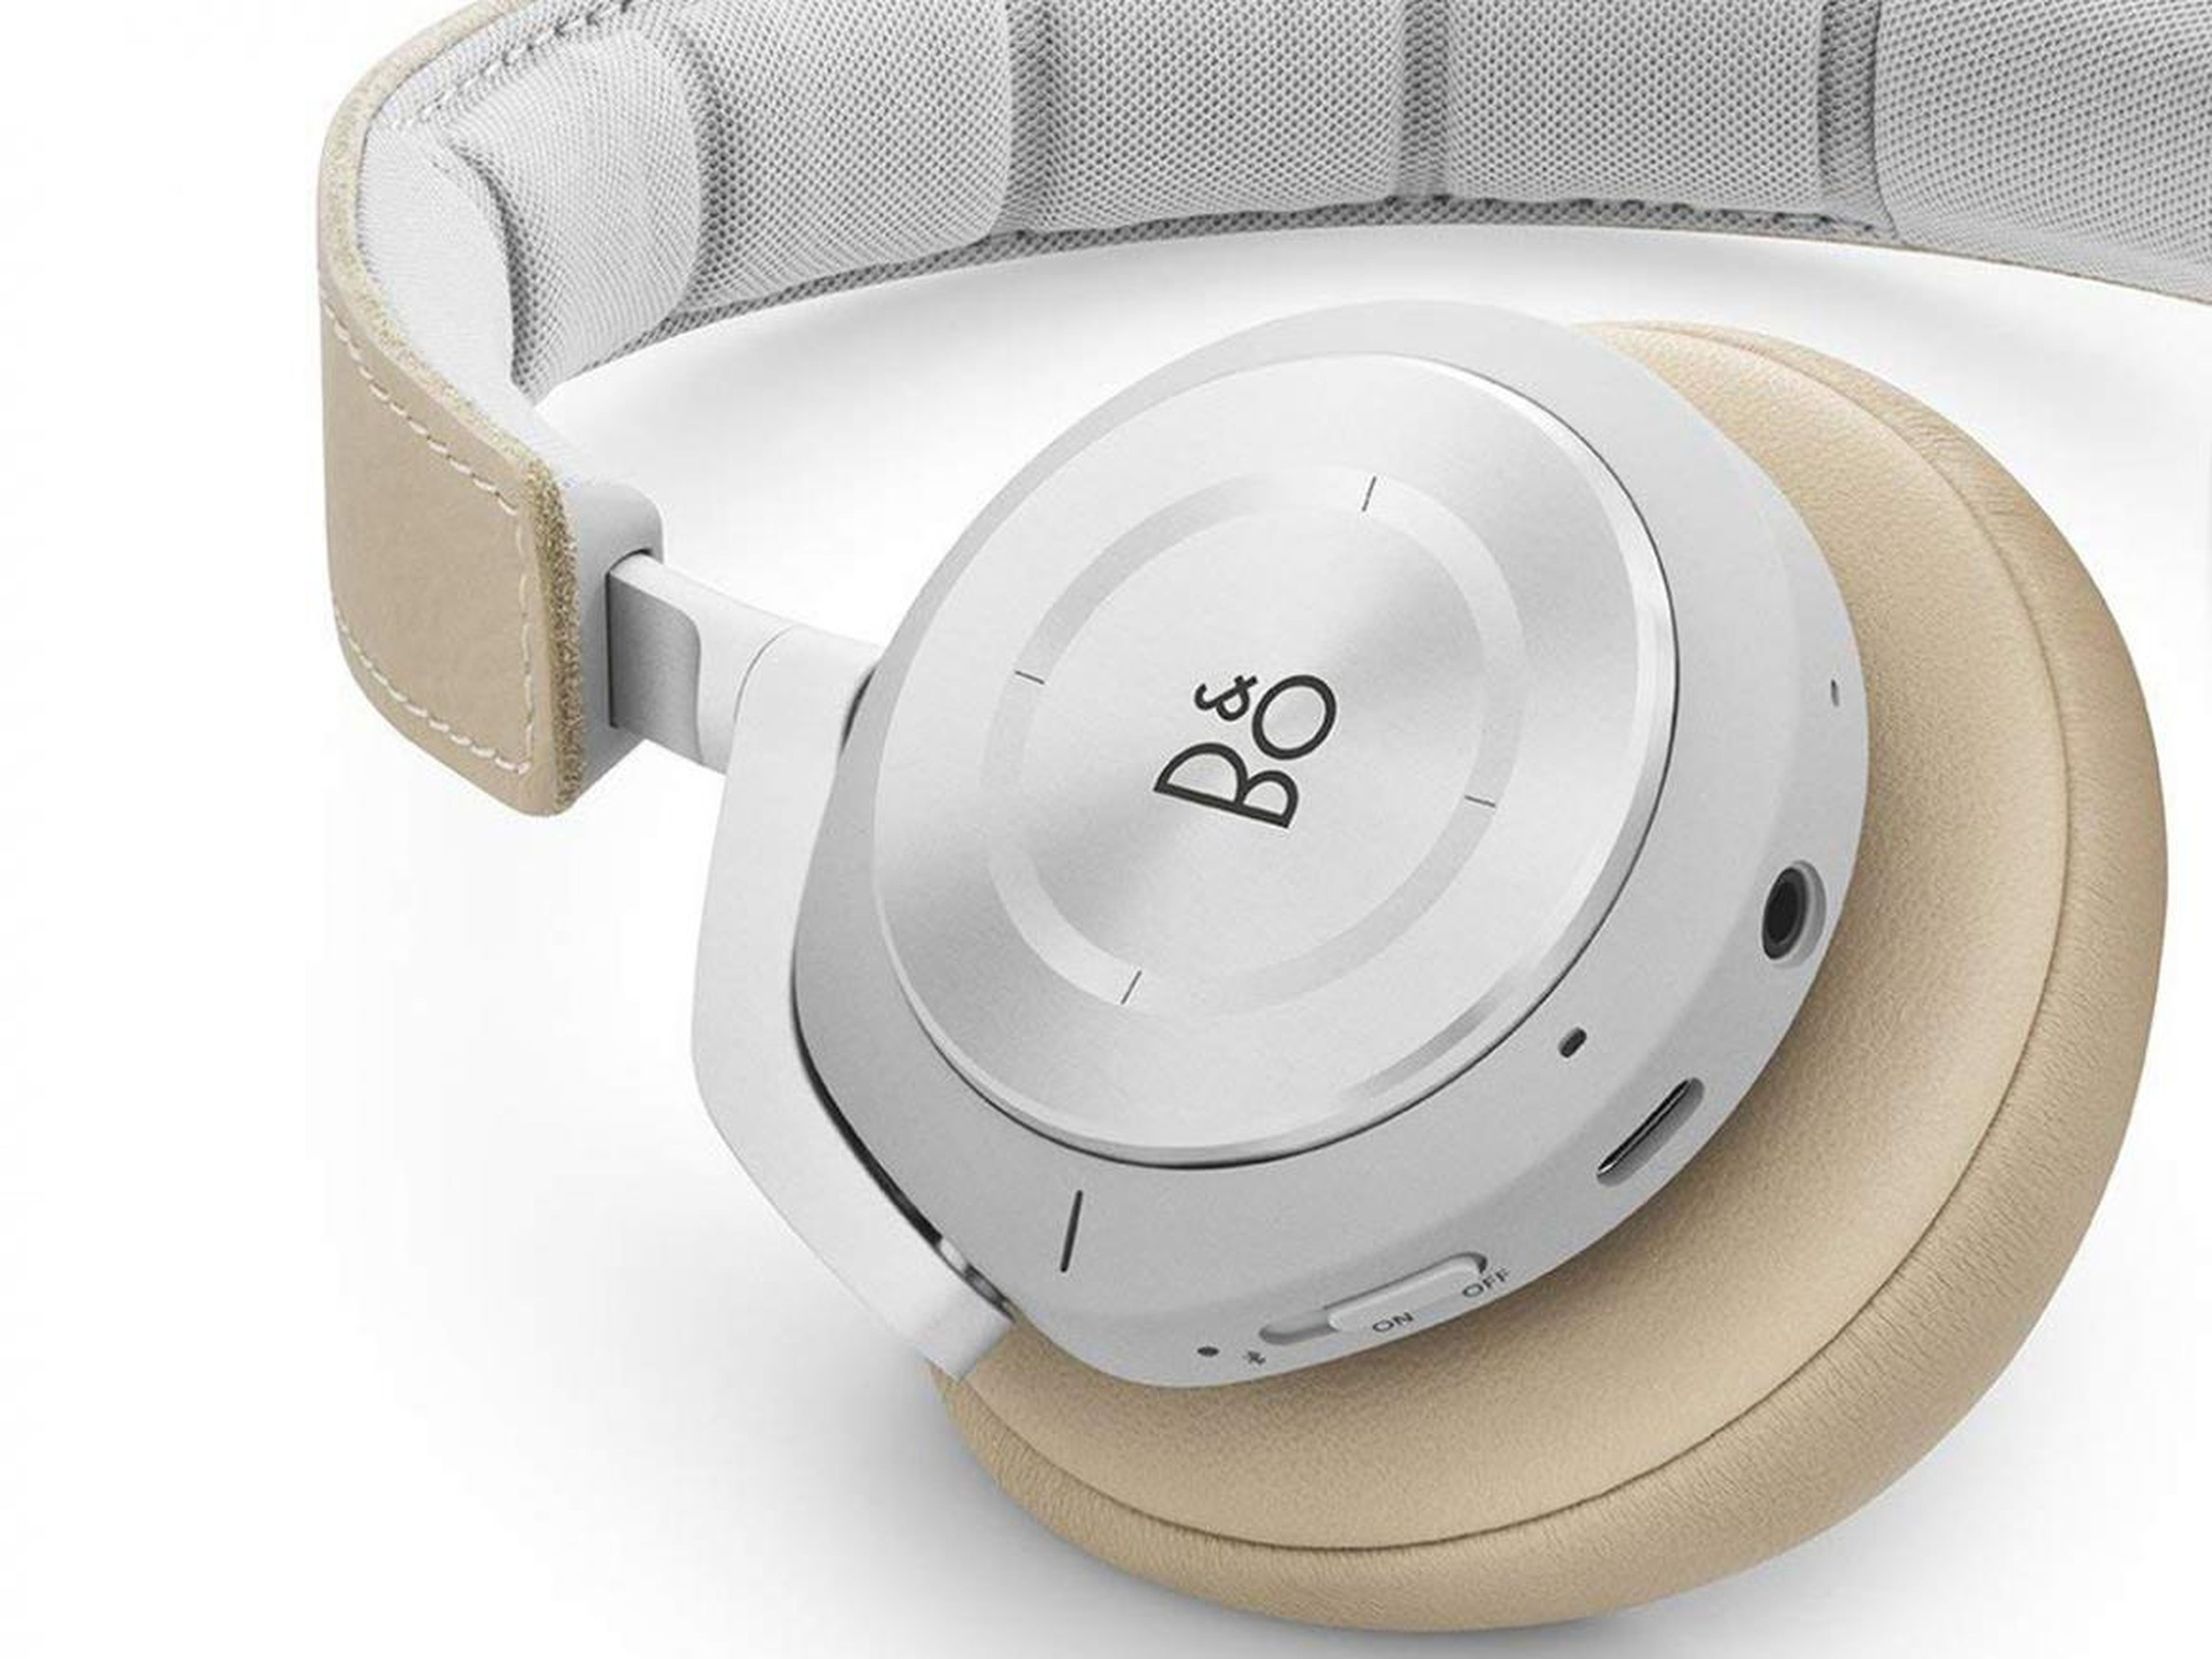 I've been using Bang & Olufsen's $350 noise-cancelling headphones for months, and I've officially determined they're my favorite pair